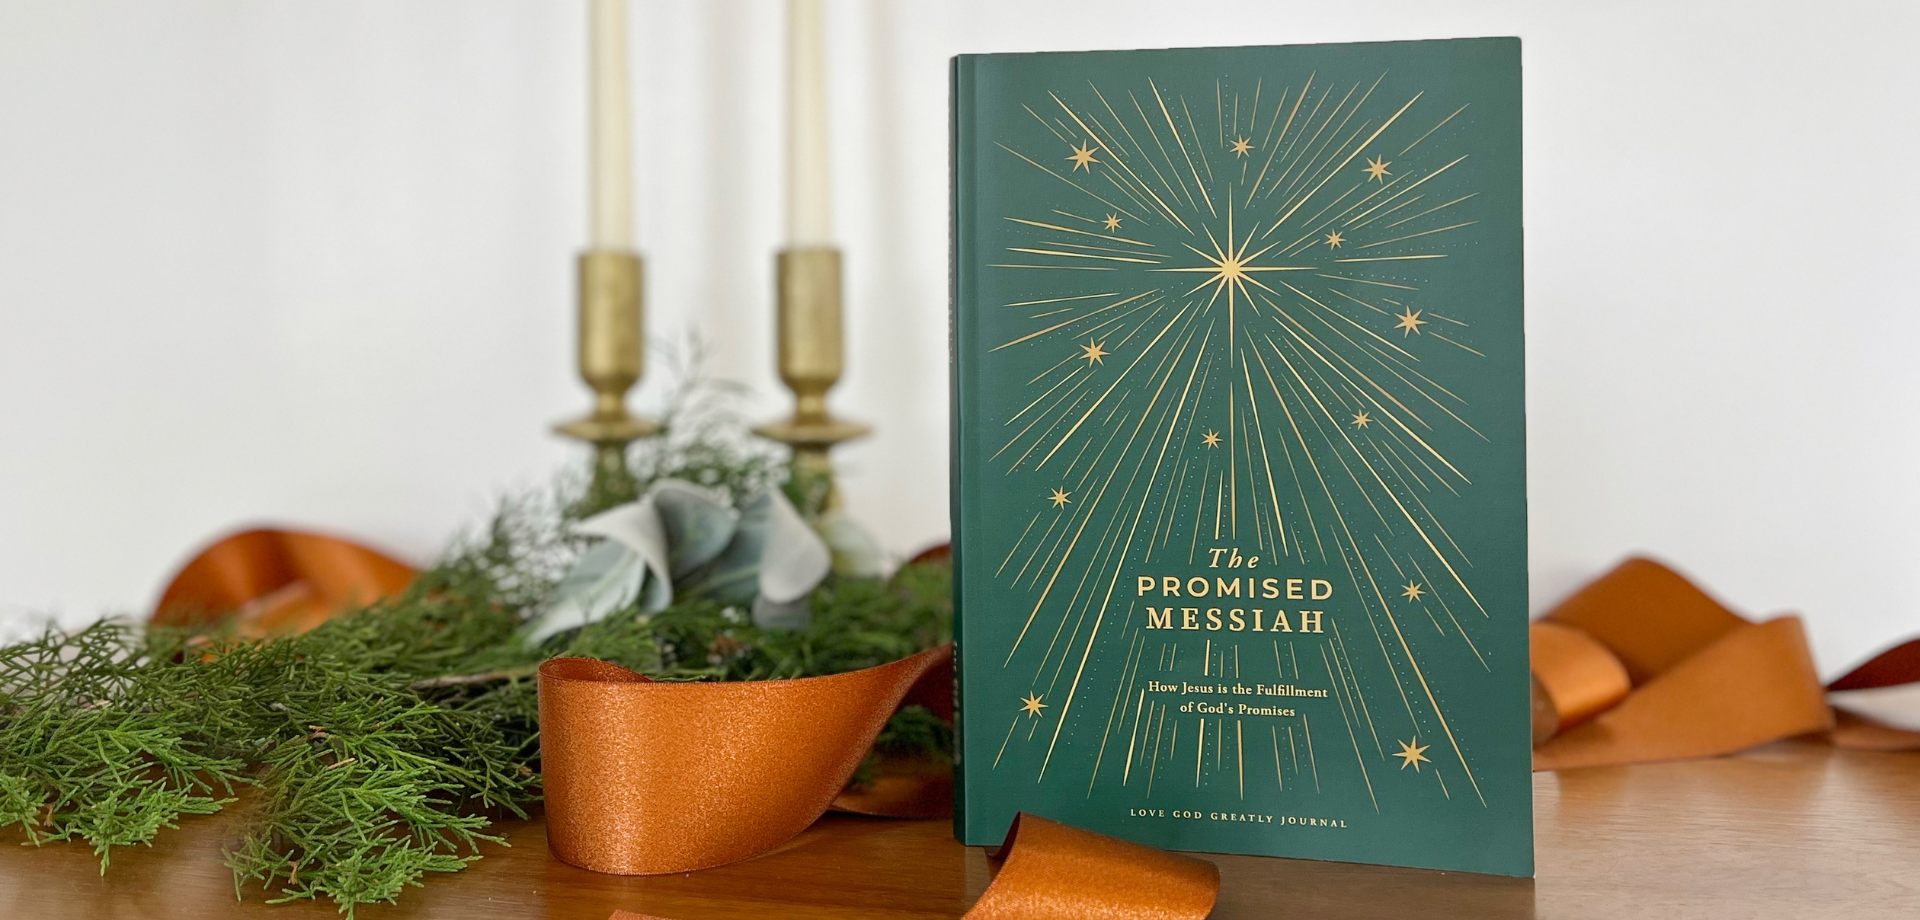 Shop our Advent Bible study for women!